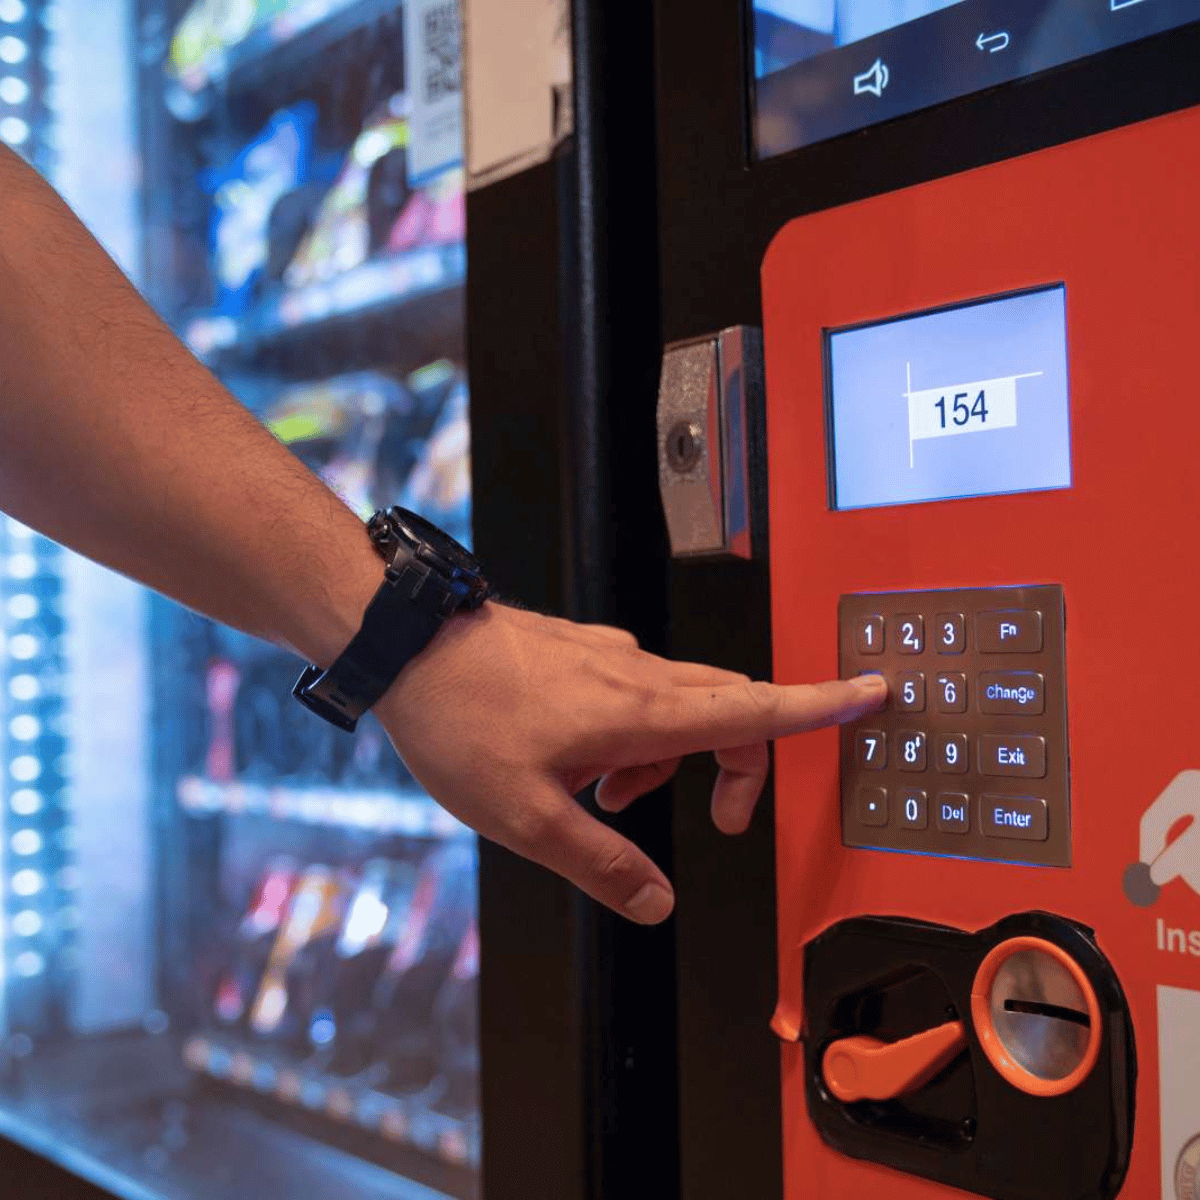 TODAY’S VENDING MACHINES TAKE MORE THAN COINS